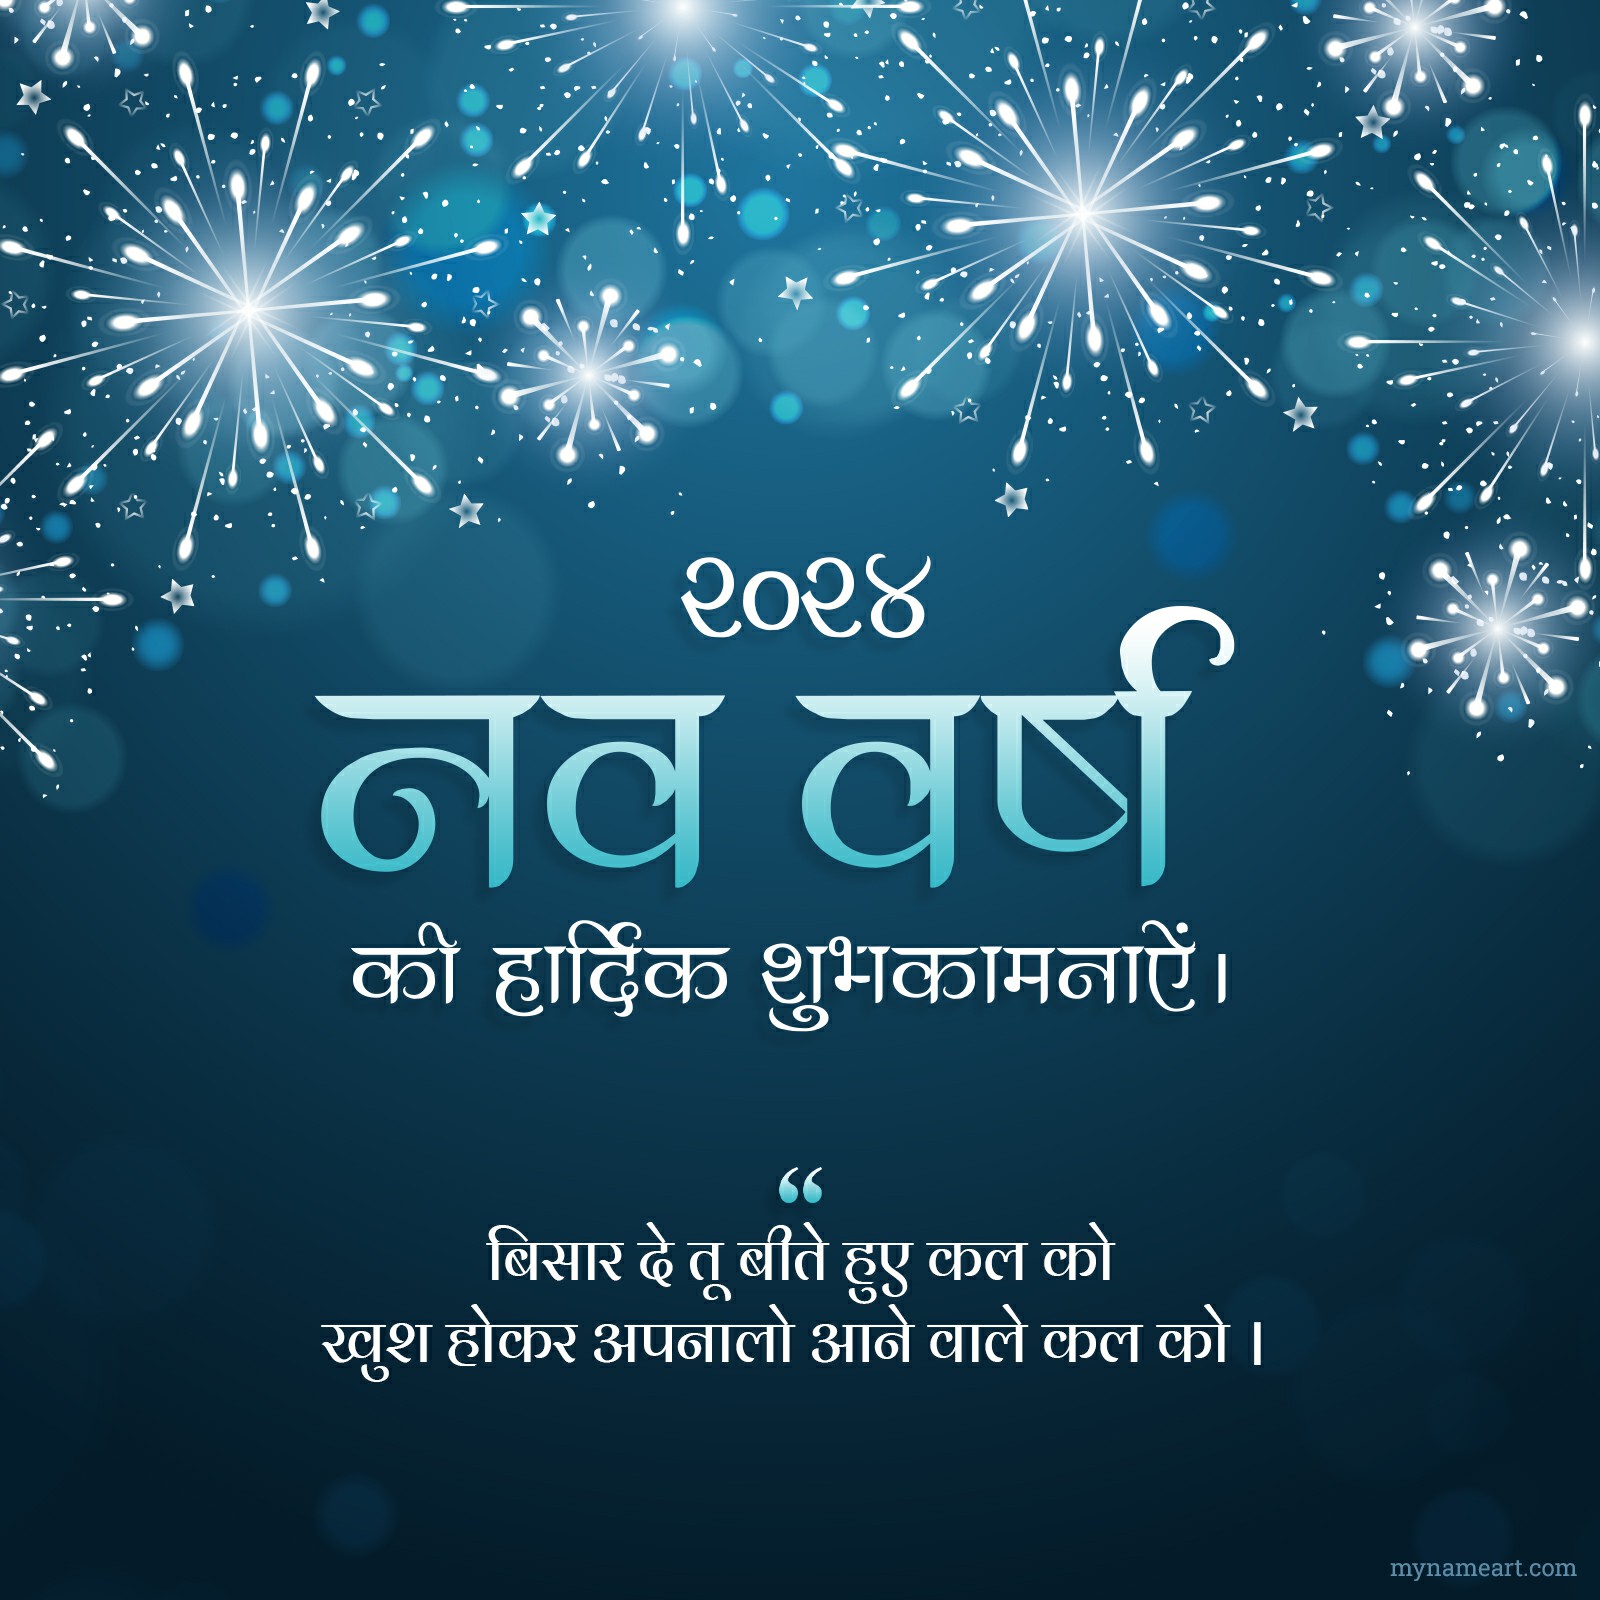 Happy New Year Hindi Wishes Images, Quotes, Status 2023